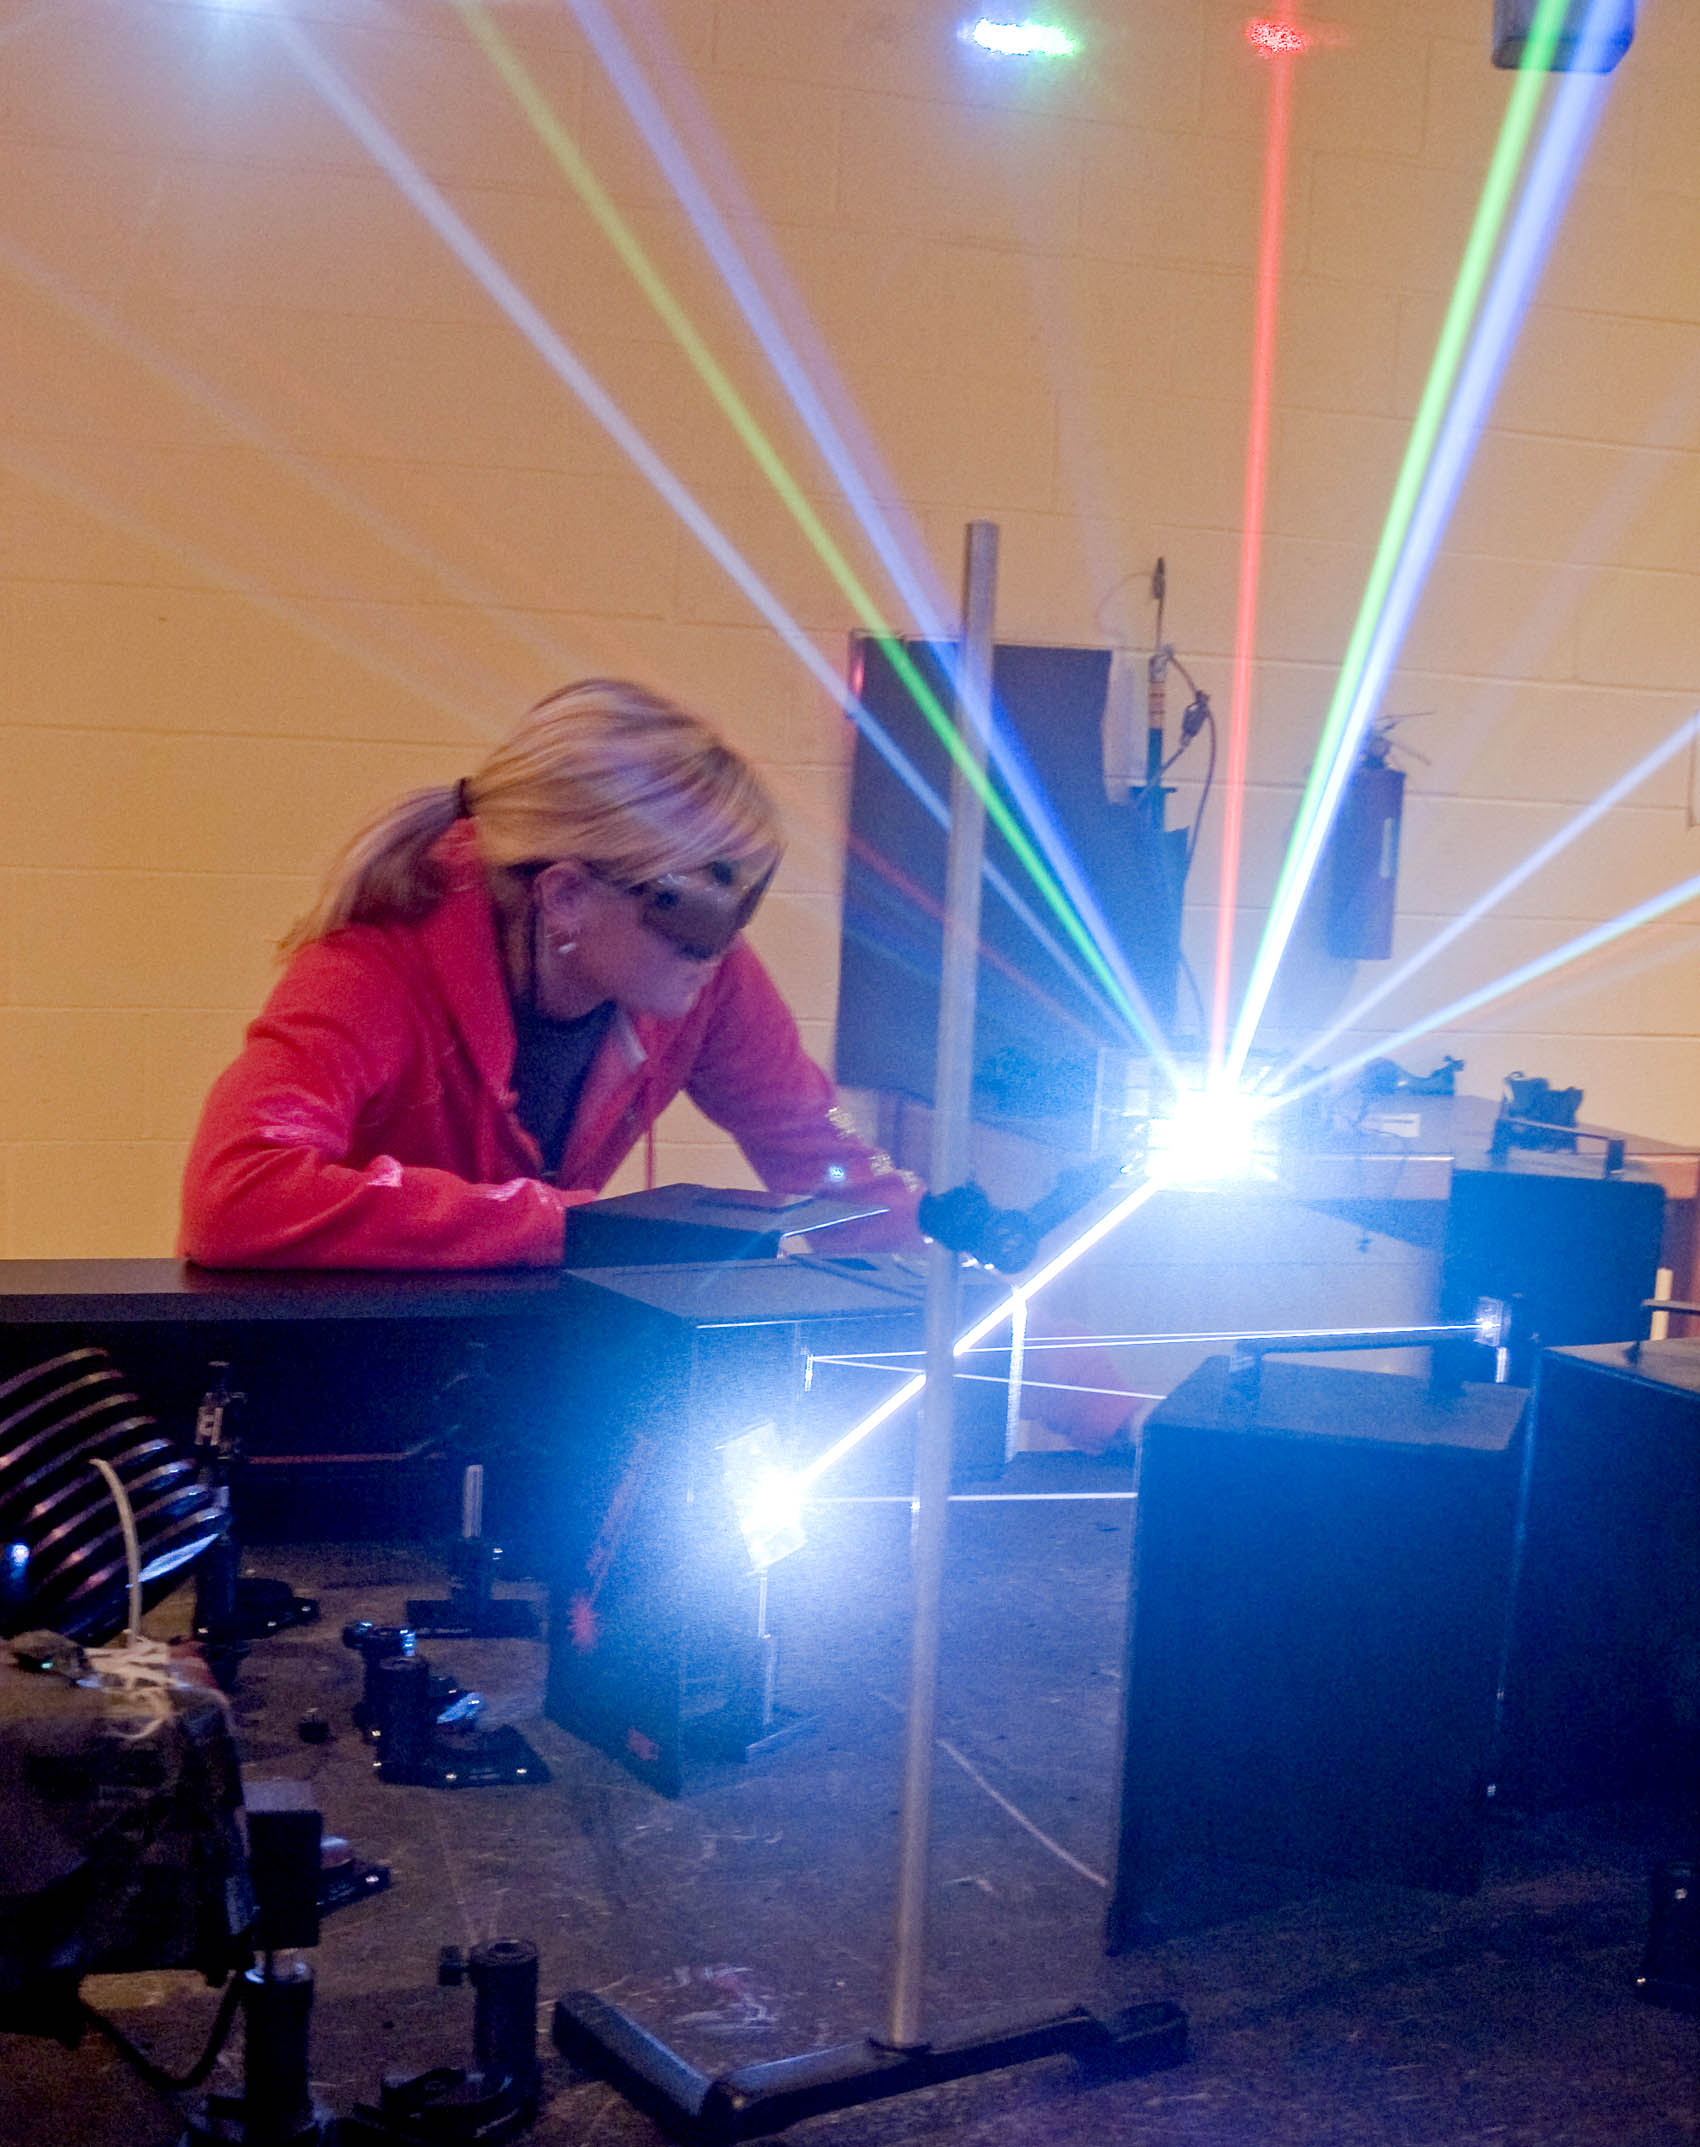 Click to enlarge,  Central Carolina Community College's Laser and Photonics Technology program focuses its instruction on understanding the application of electronic, fiber optic, photonic, and laser principles. An emphasis on hands-on learning prepares students for real-world projects and practical applications. For more information on CCCC's Laser and Photonics Technology program, contact Gary Beasley, Lead Instructor - Laser &amp; Photonics Technology, at 910-814-8828 or by email at gbeasley@cccc.edu. 